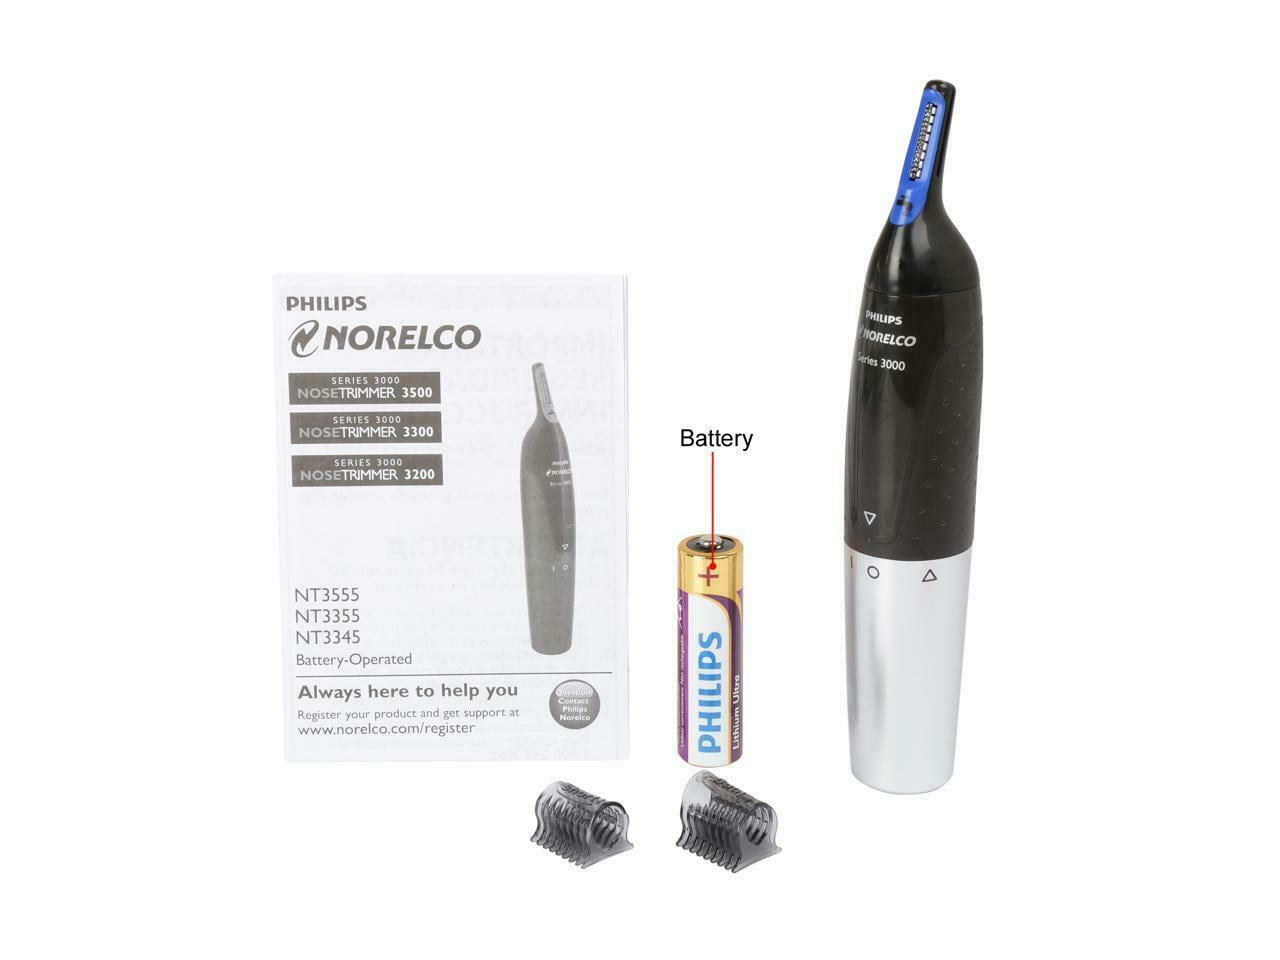 philips series 3000 nose trimmer spares